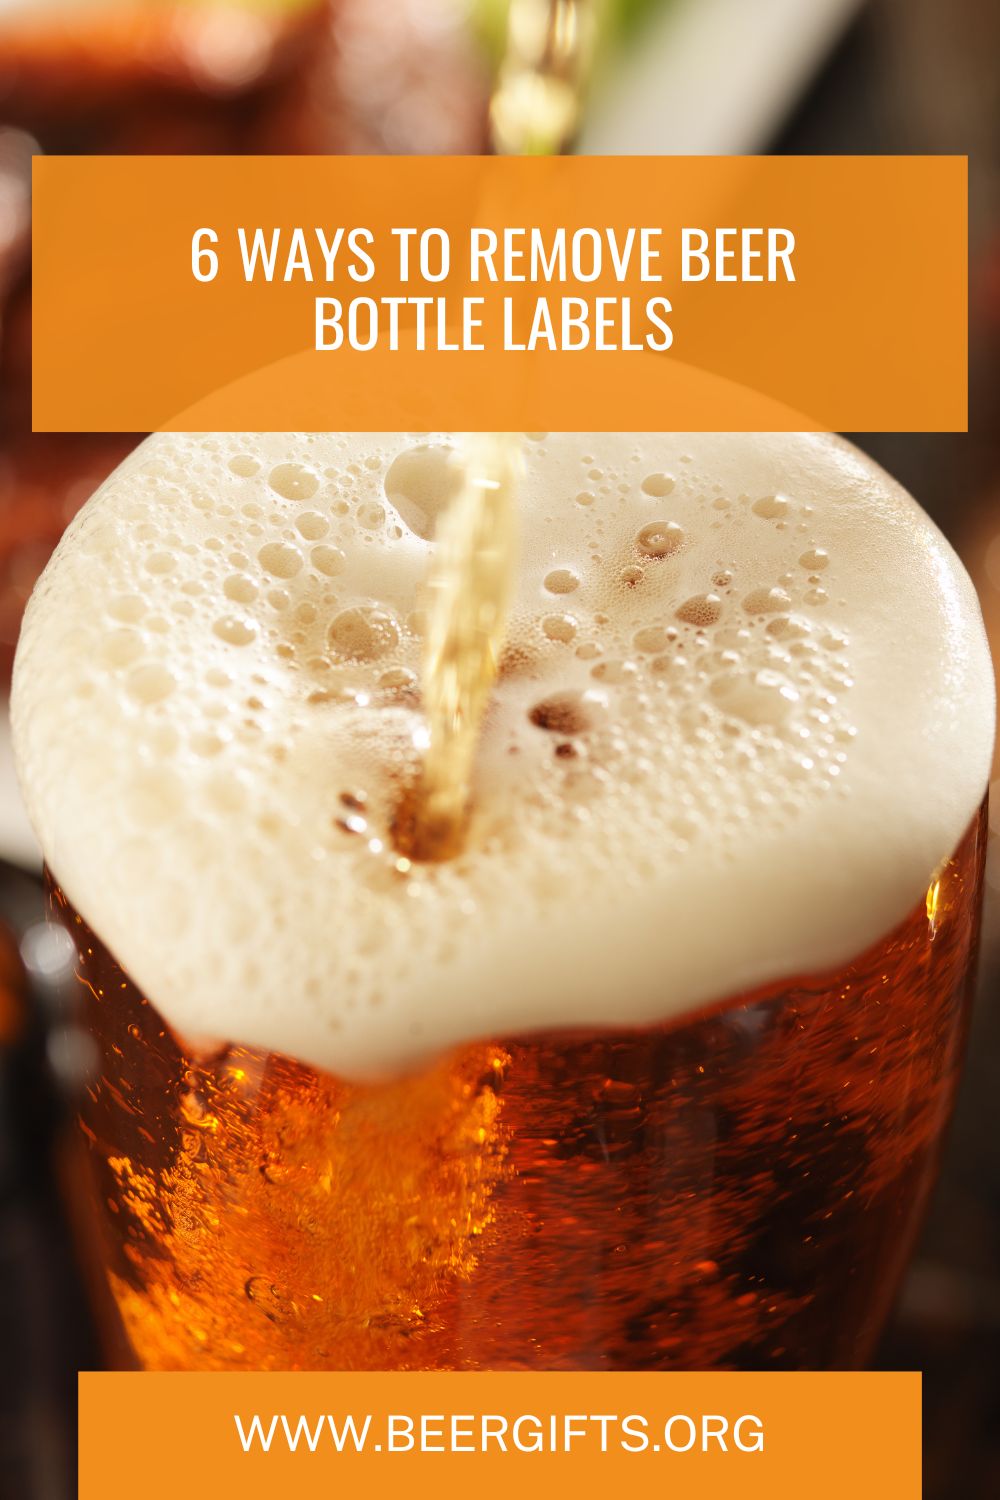 6 Ways to Remove Beer Bottle Labels2